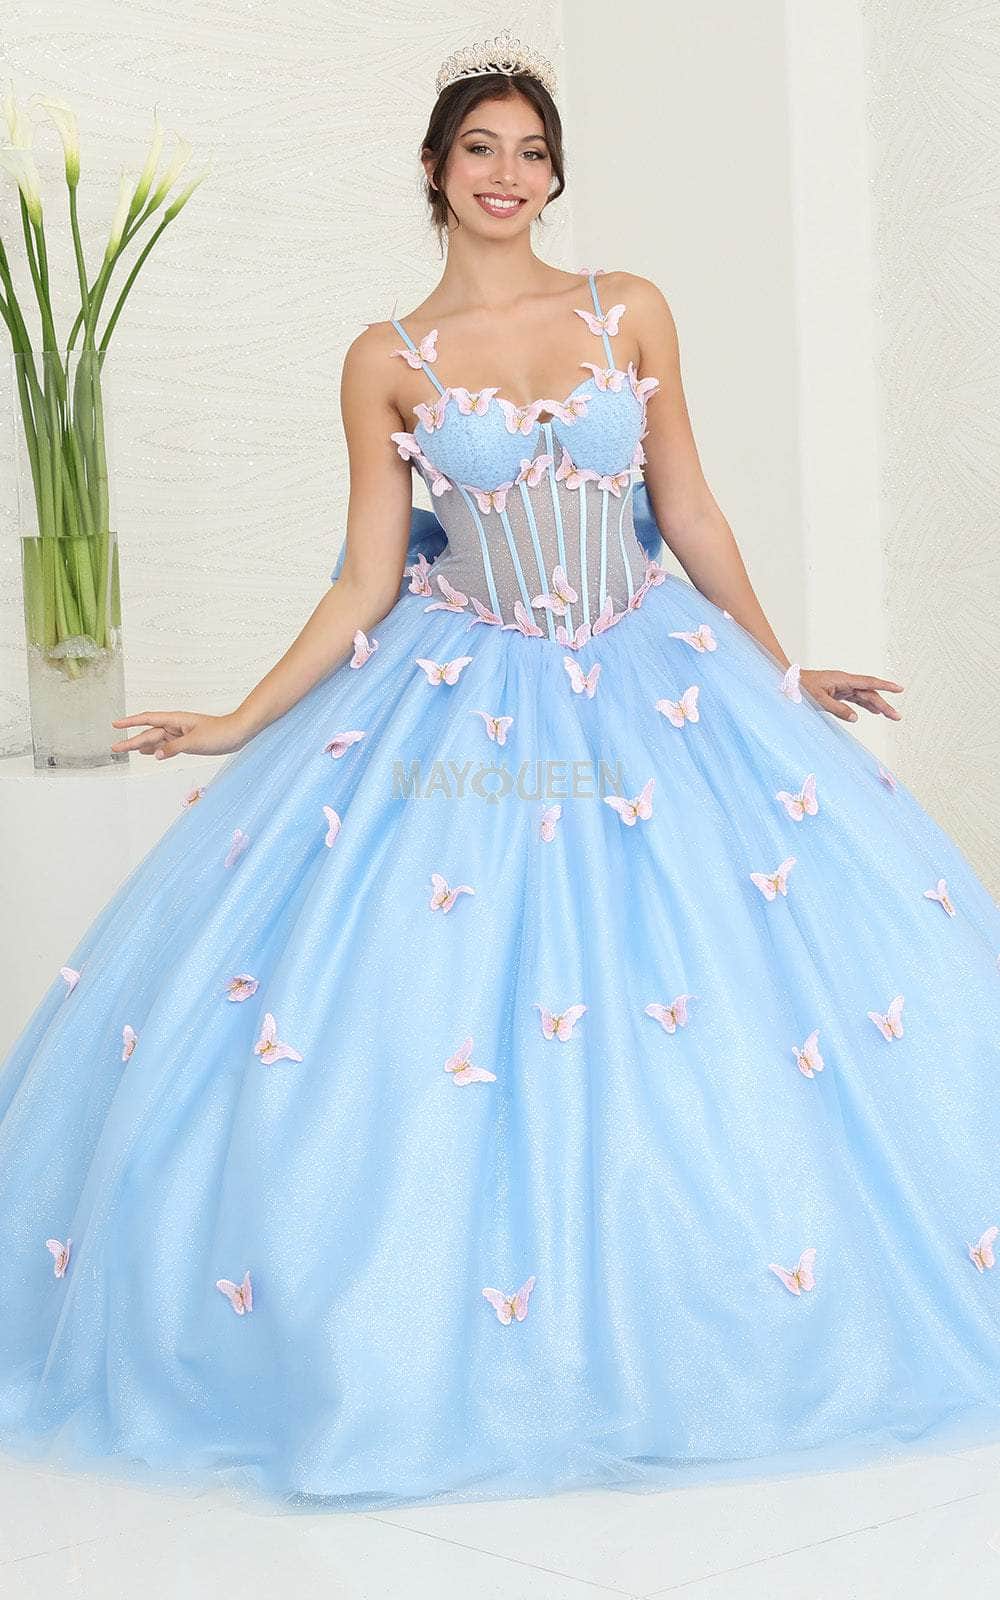 Image of May Queen LK239 - Butterfly Corset Ballgown